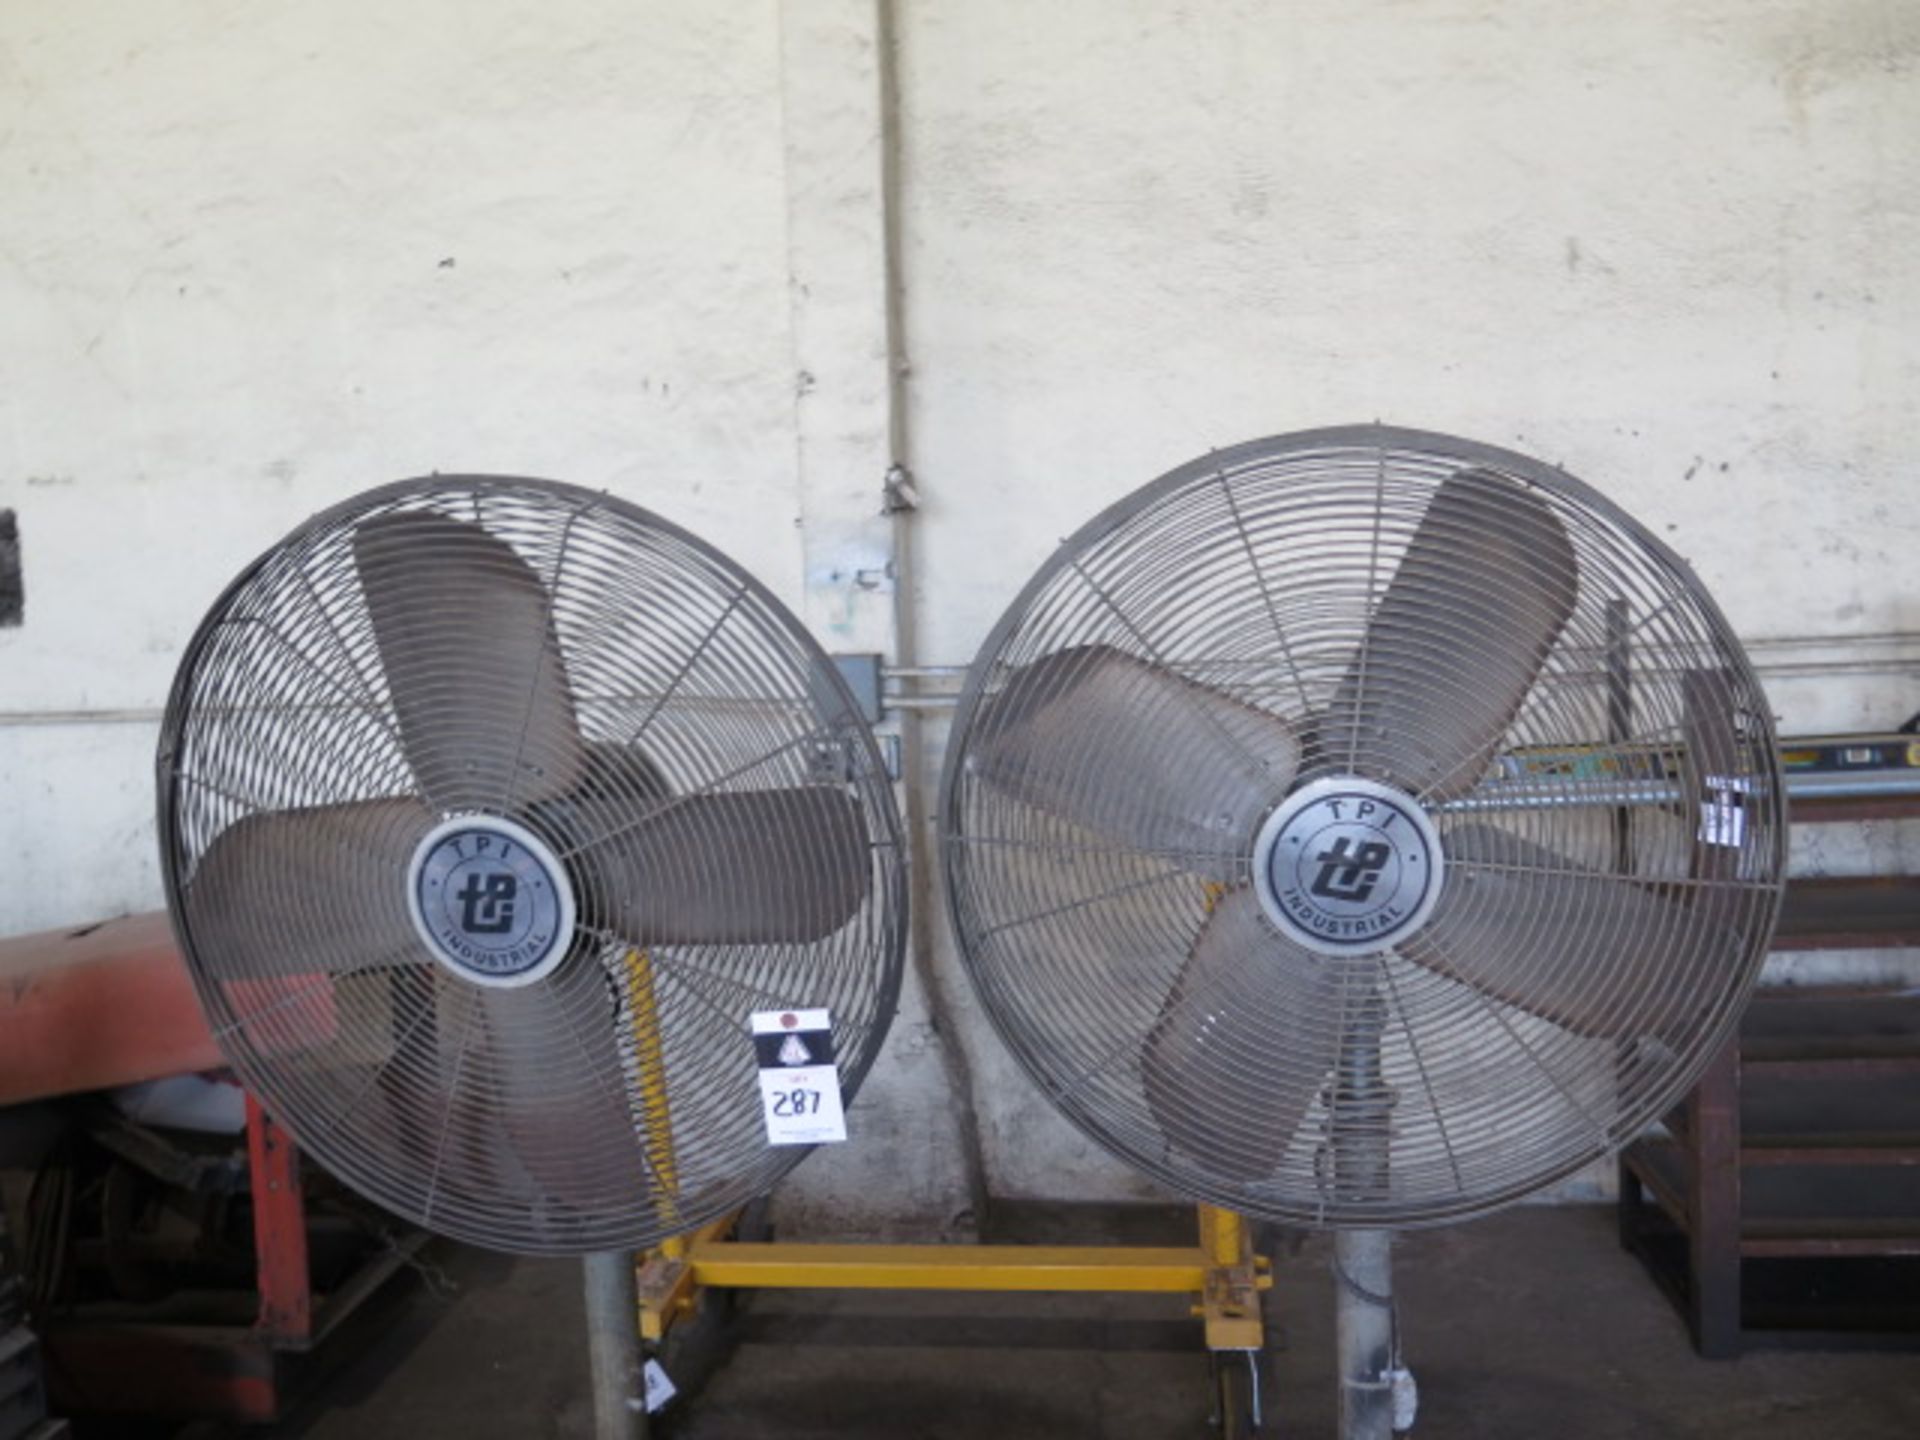 Shop Fans (3) (SOLD AS-IS - NO WARRANTY) - Image 2 of 3